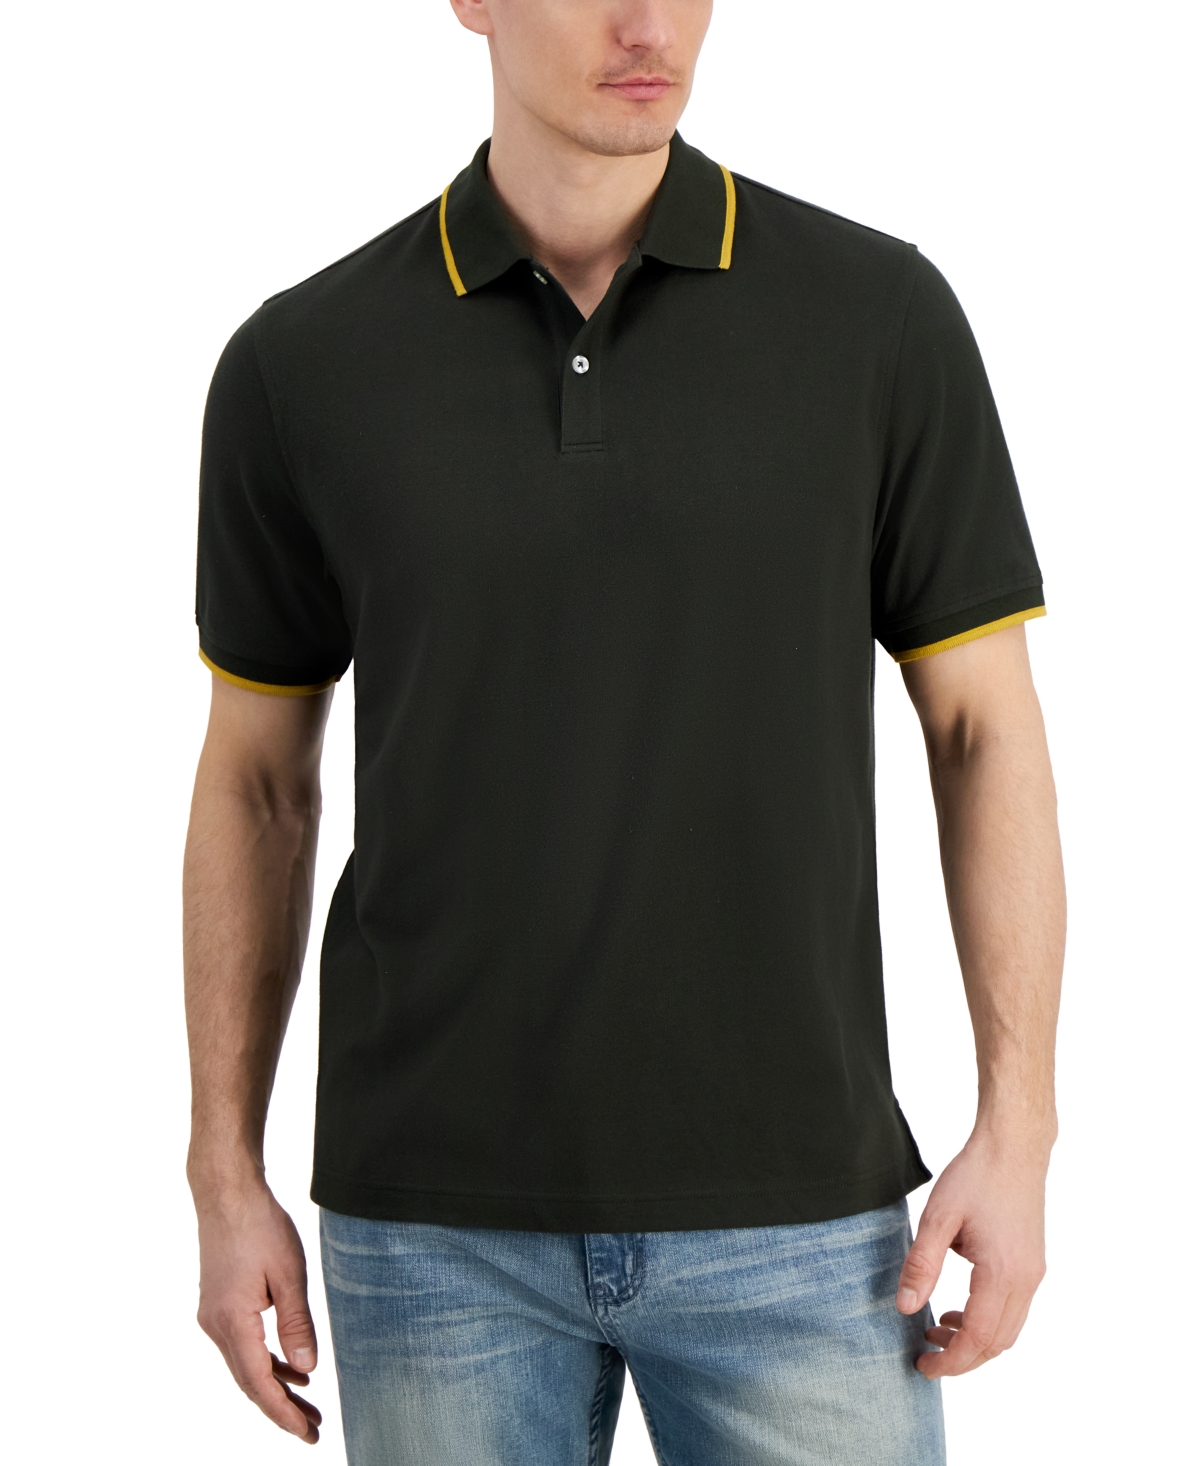 Men's Regular-Fit Tipped Performance Polo Shirt, Created for Macy's - Curry